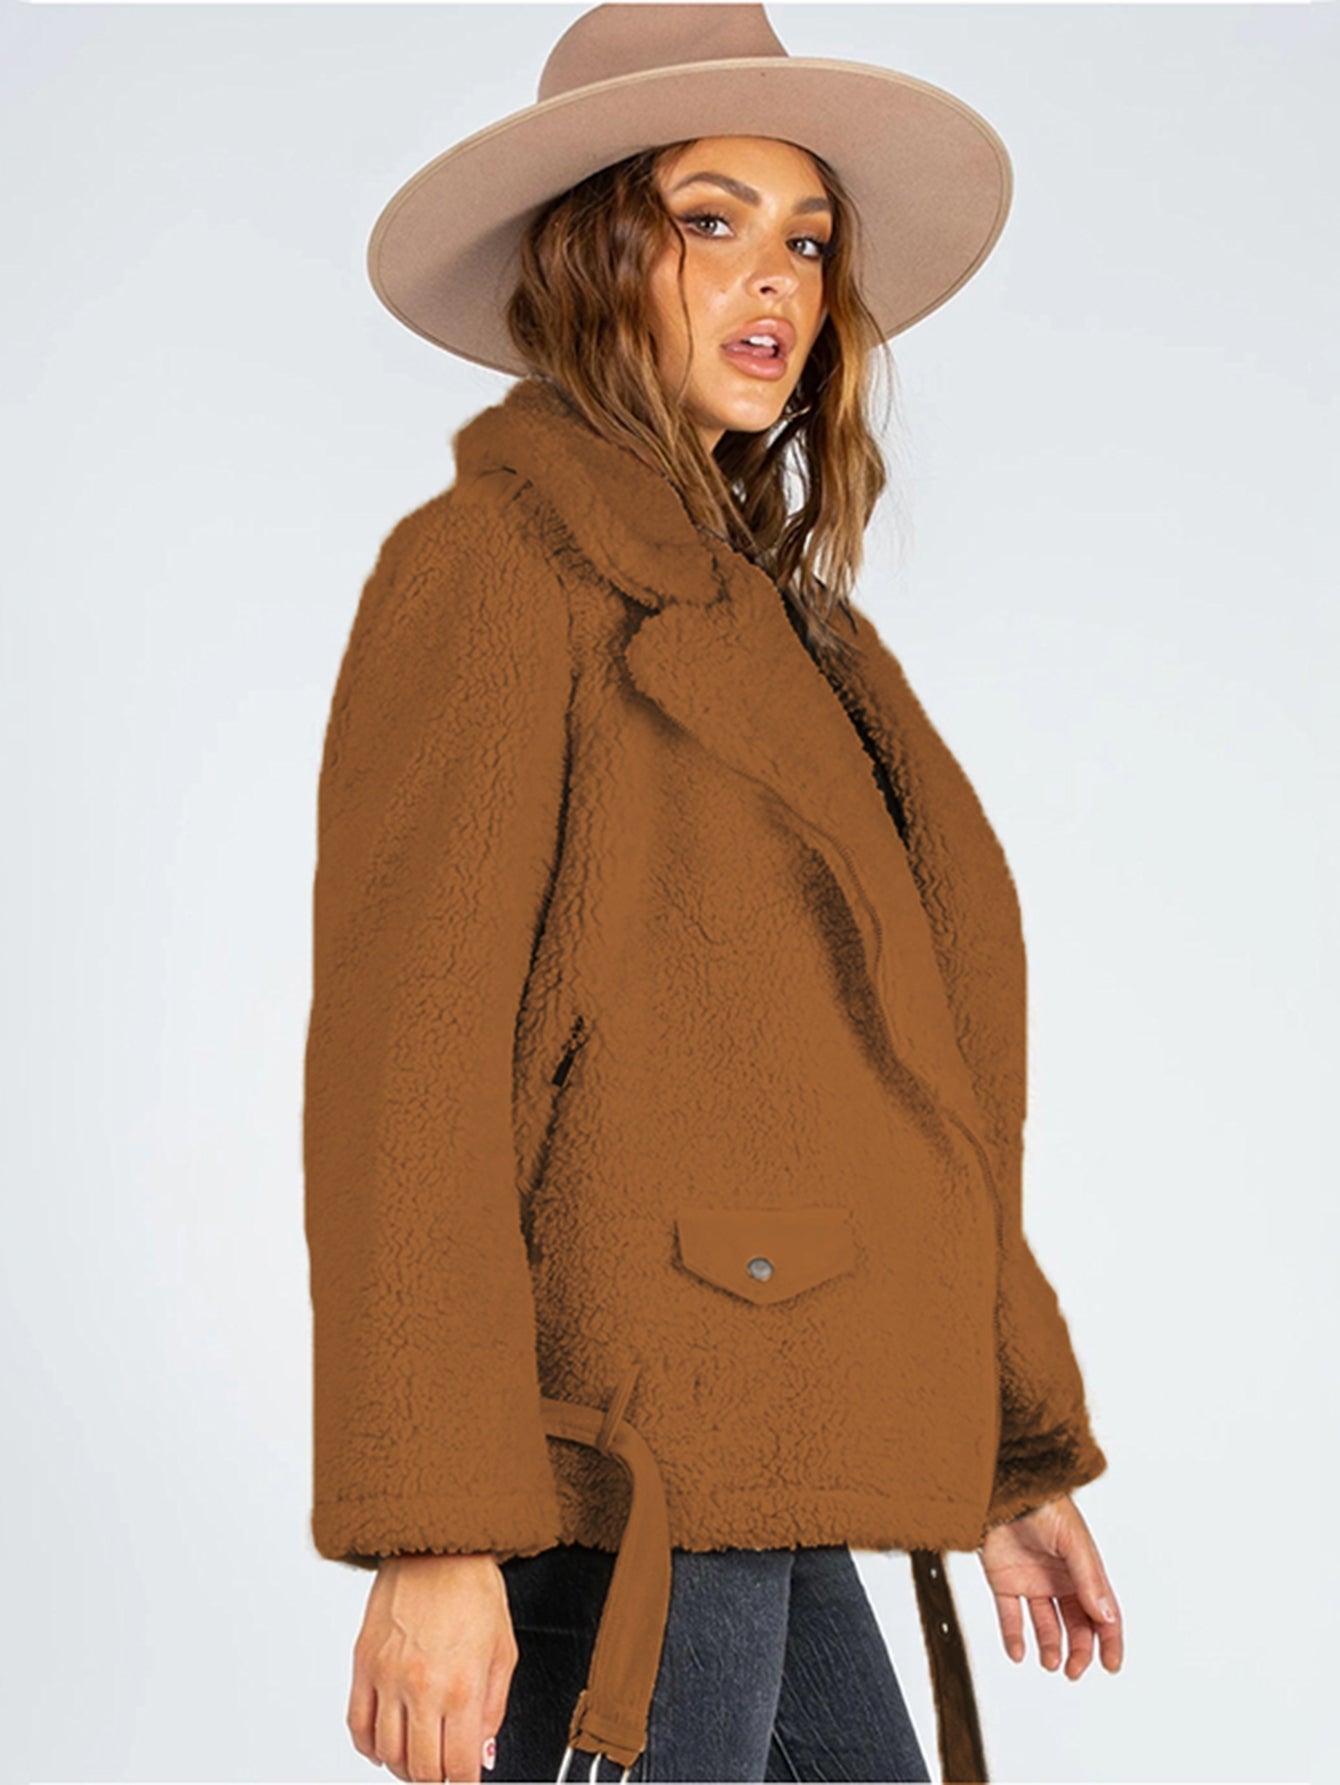 Collared Single Breasted Pocket Front Teddy Coat Sai Feel